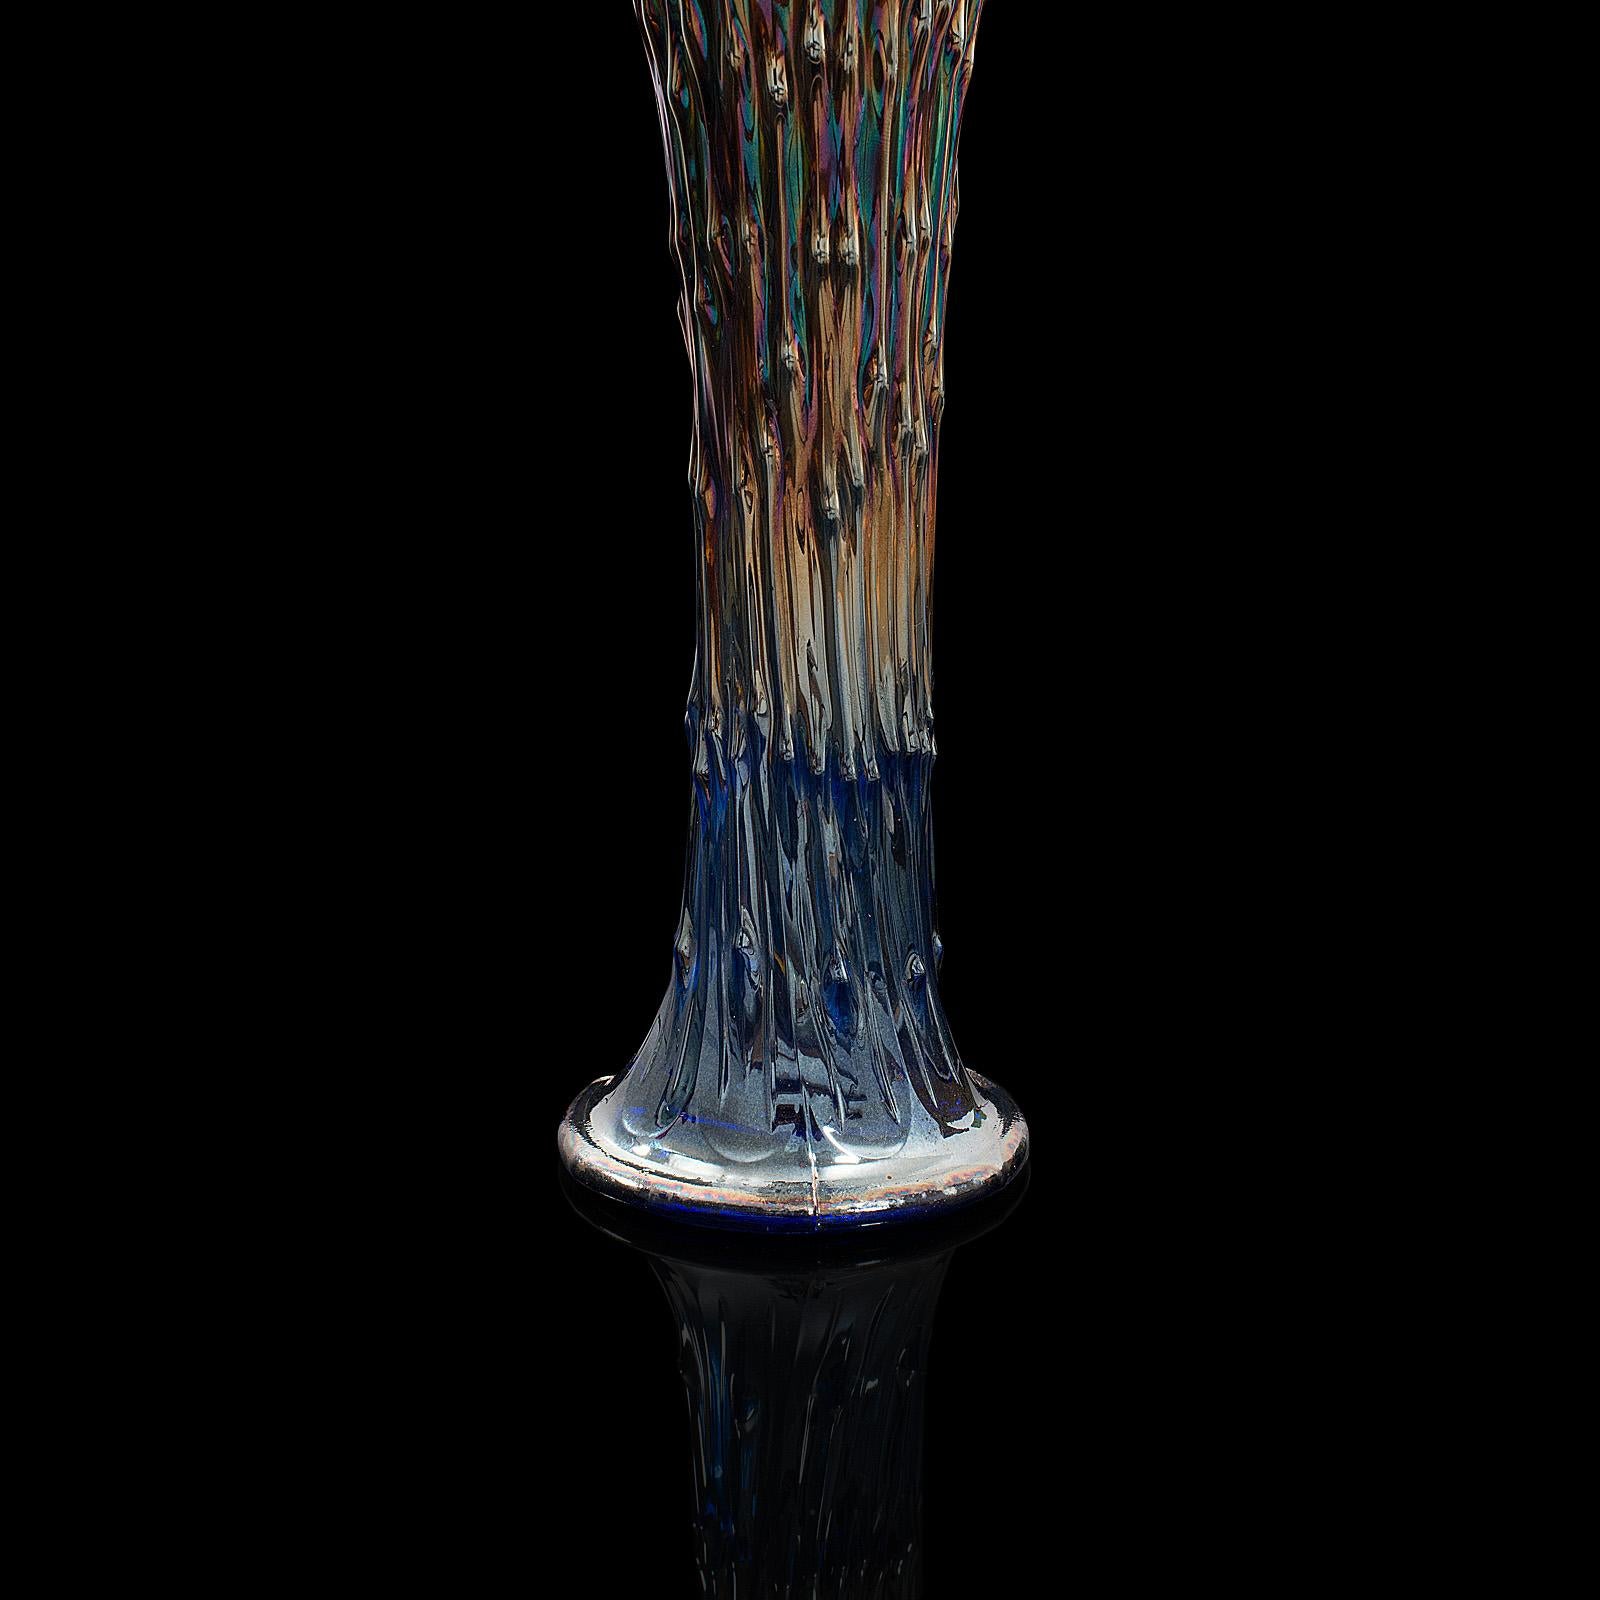 Tall Vintage Decorative Carnival Vase, English, Glass, Flower, Midcentury, 1950 For Sale 2